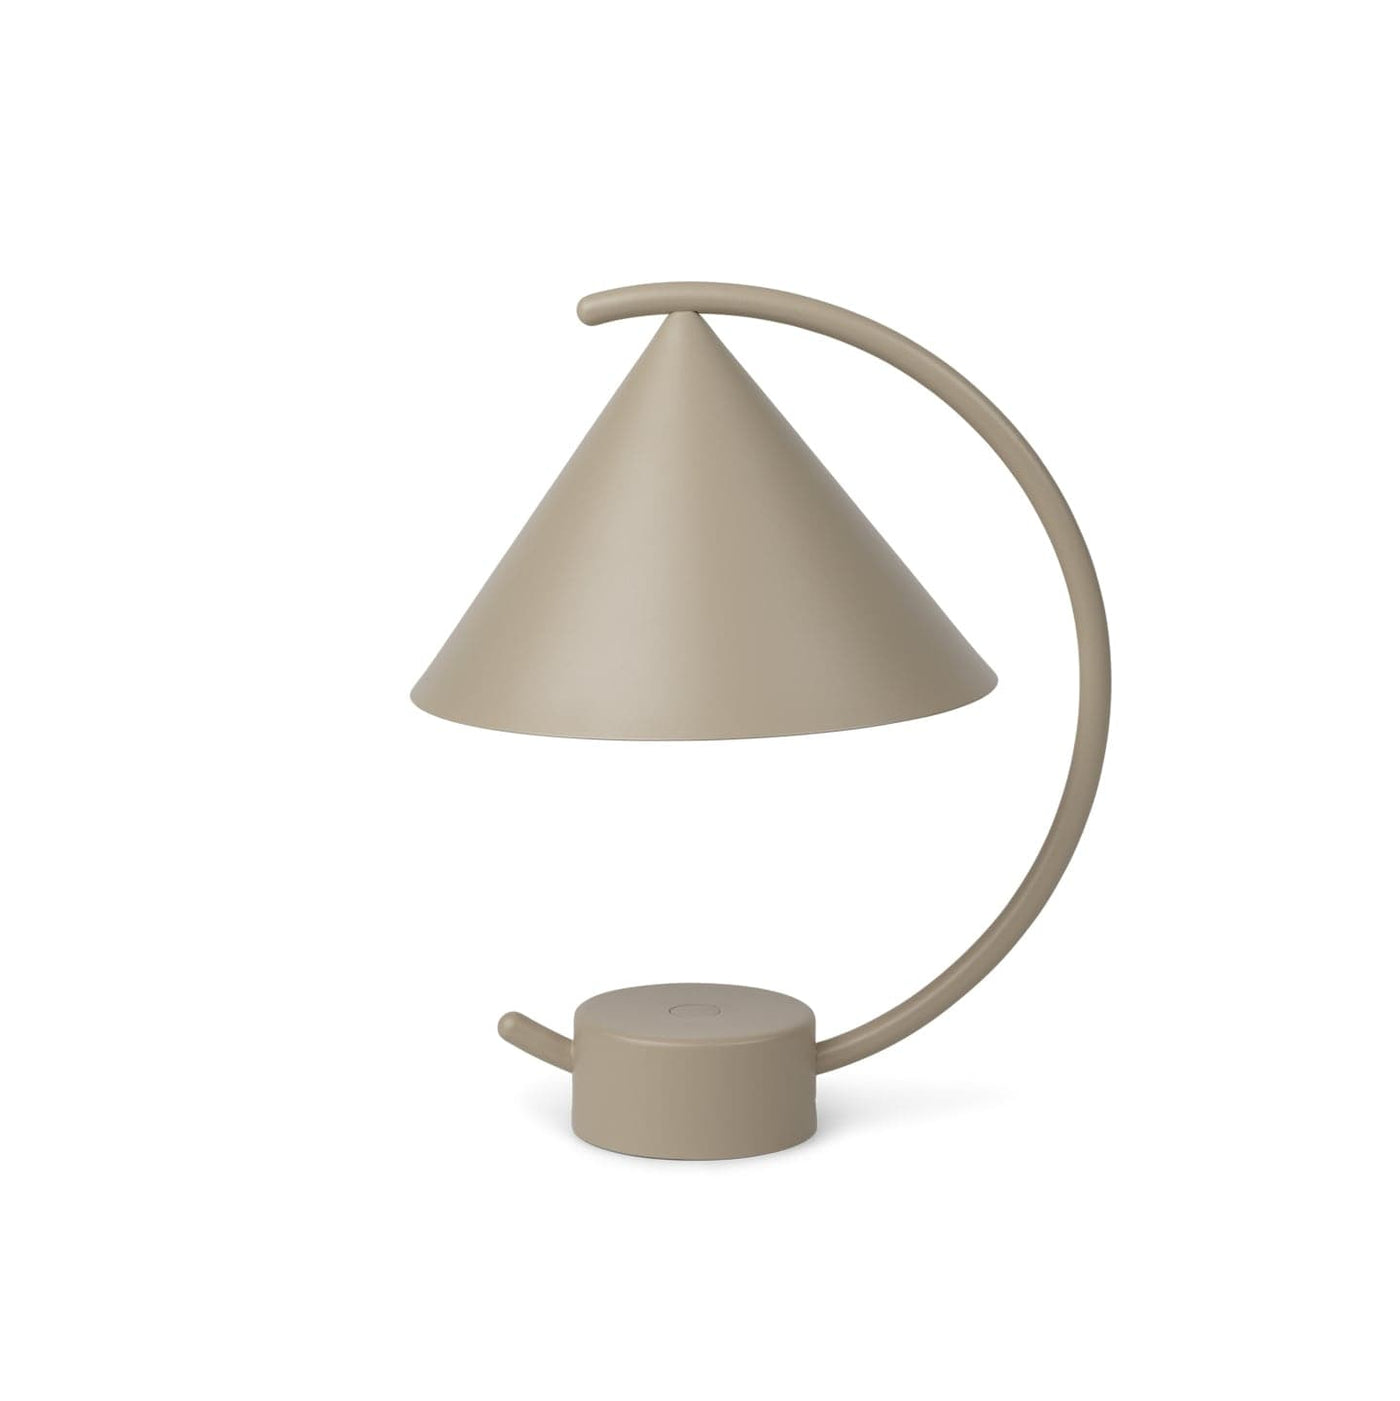 Ferm Living Meridian Lamp in cashmere. Buy online at someday designs. #colour_cashmere